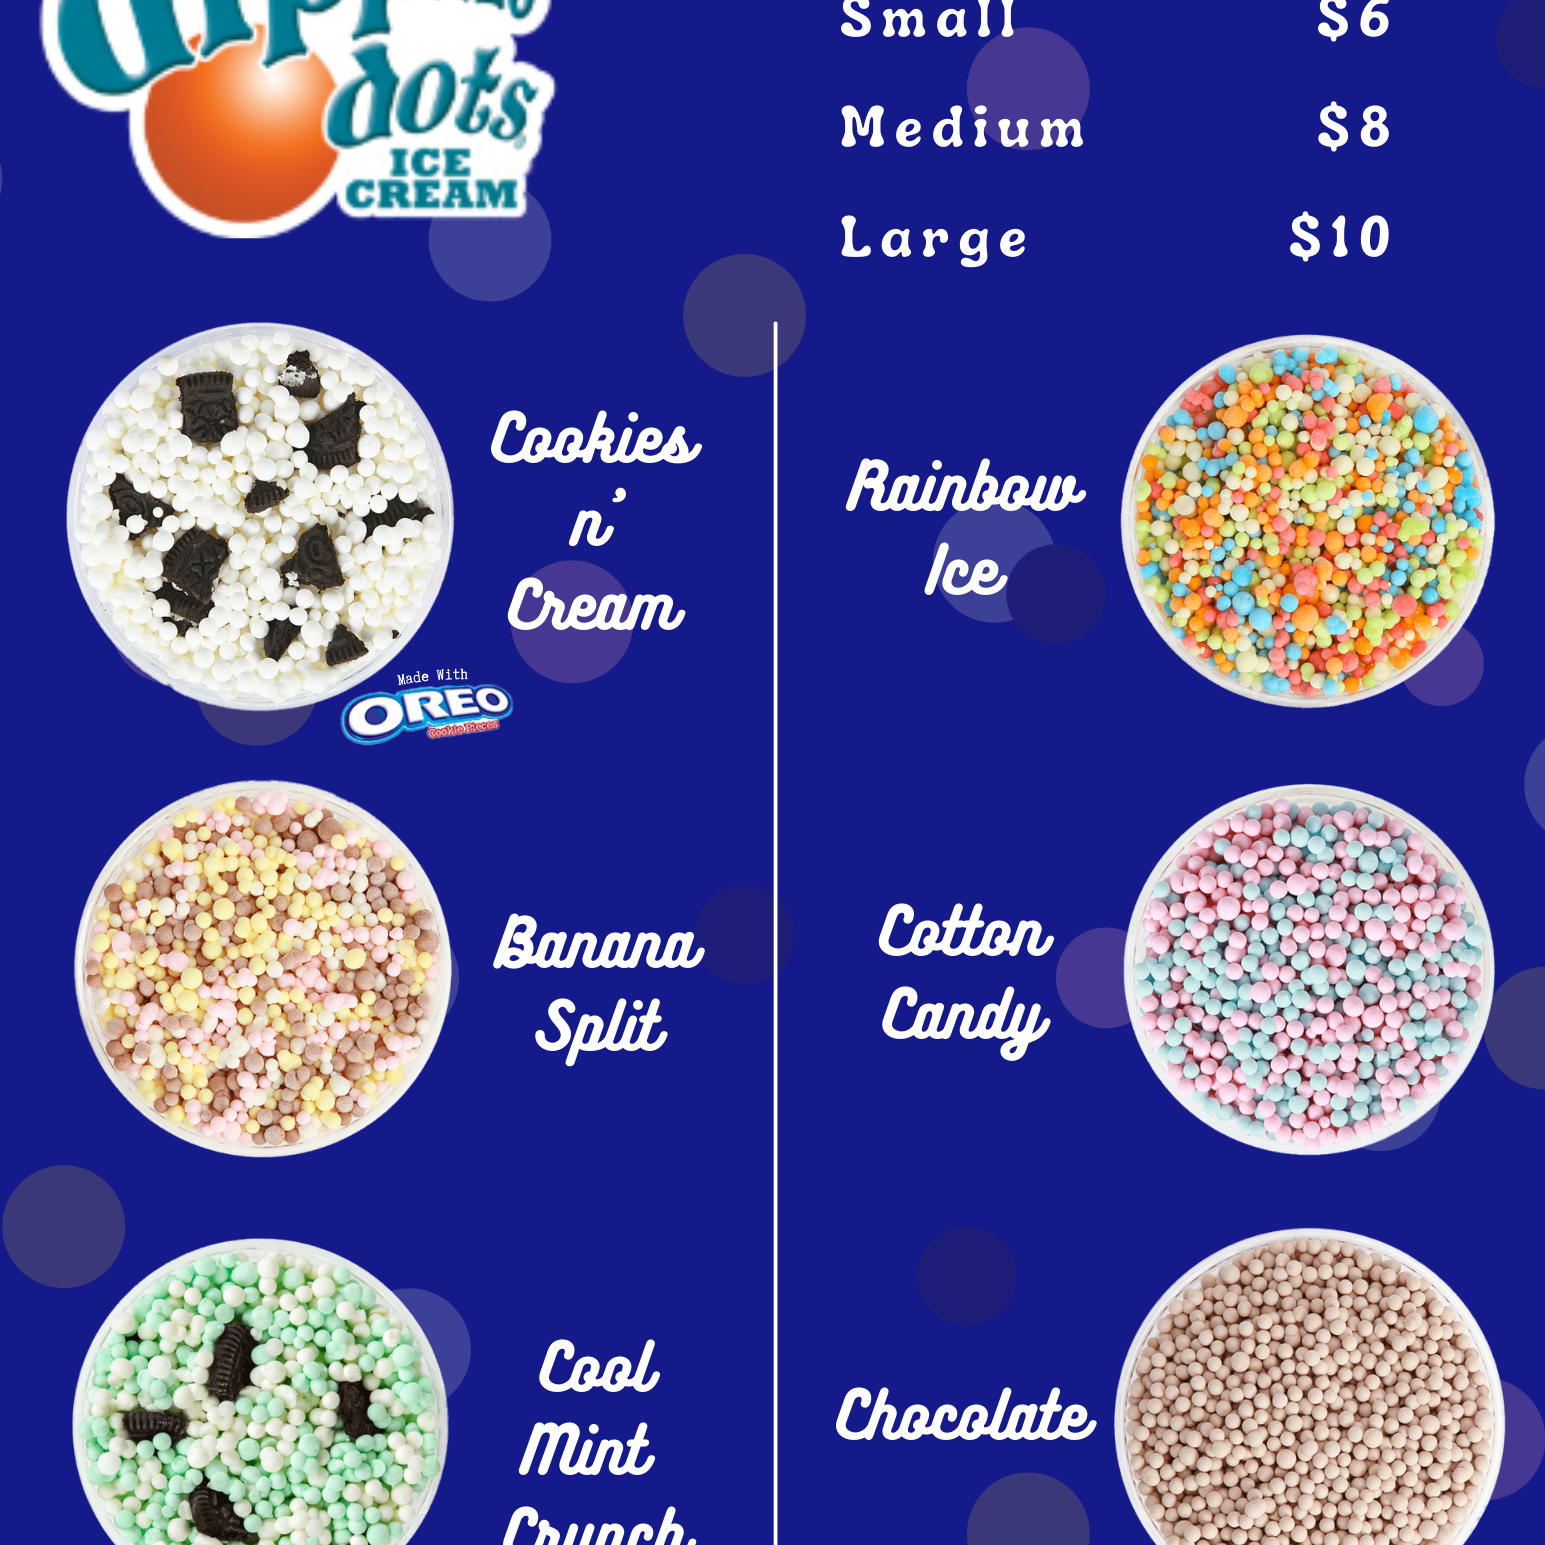 Dippin Dots Ice Cream, Blue Raspberry & Lemon Ices with Candy, Ice Cream